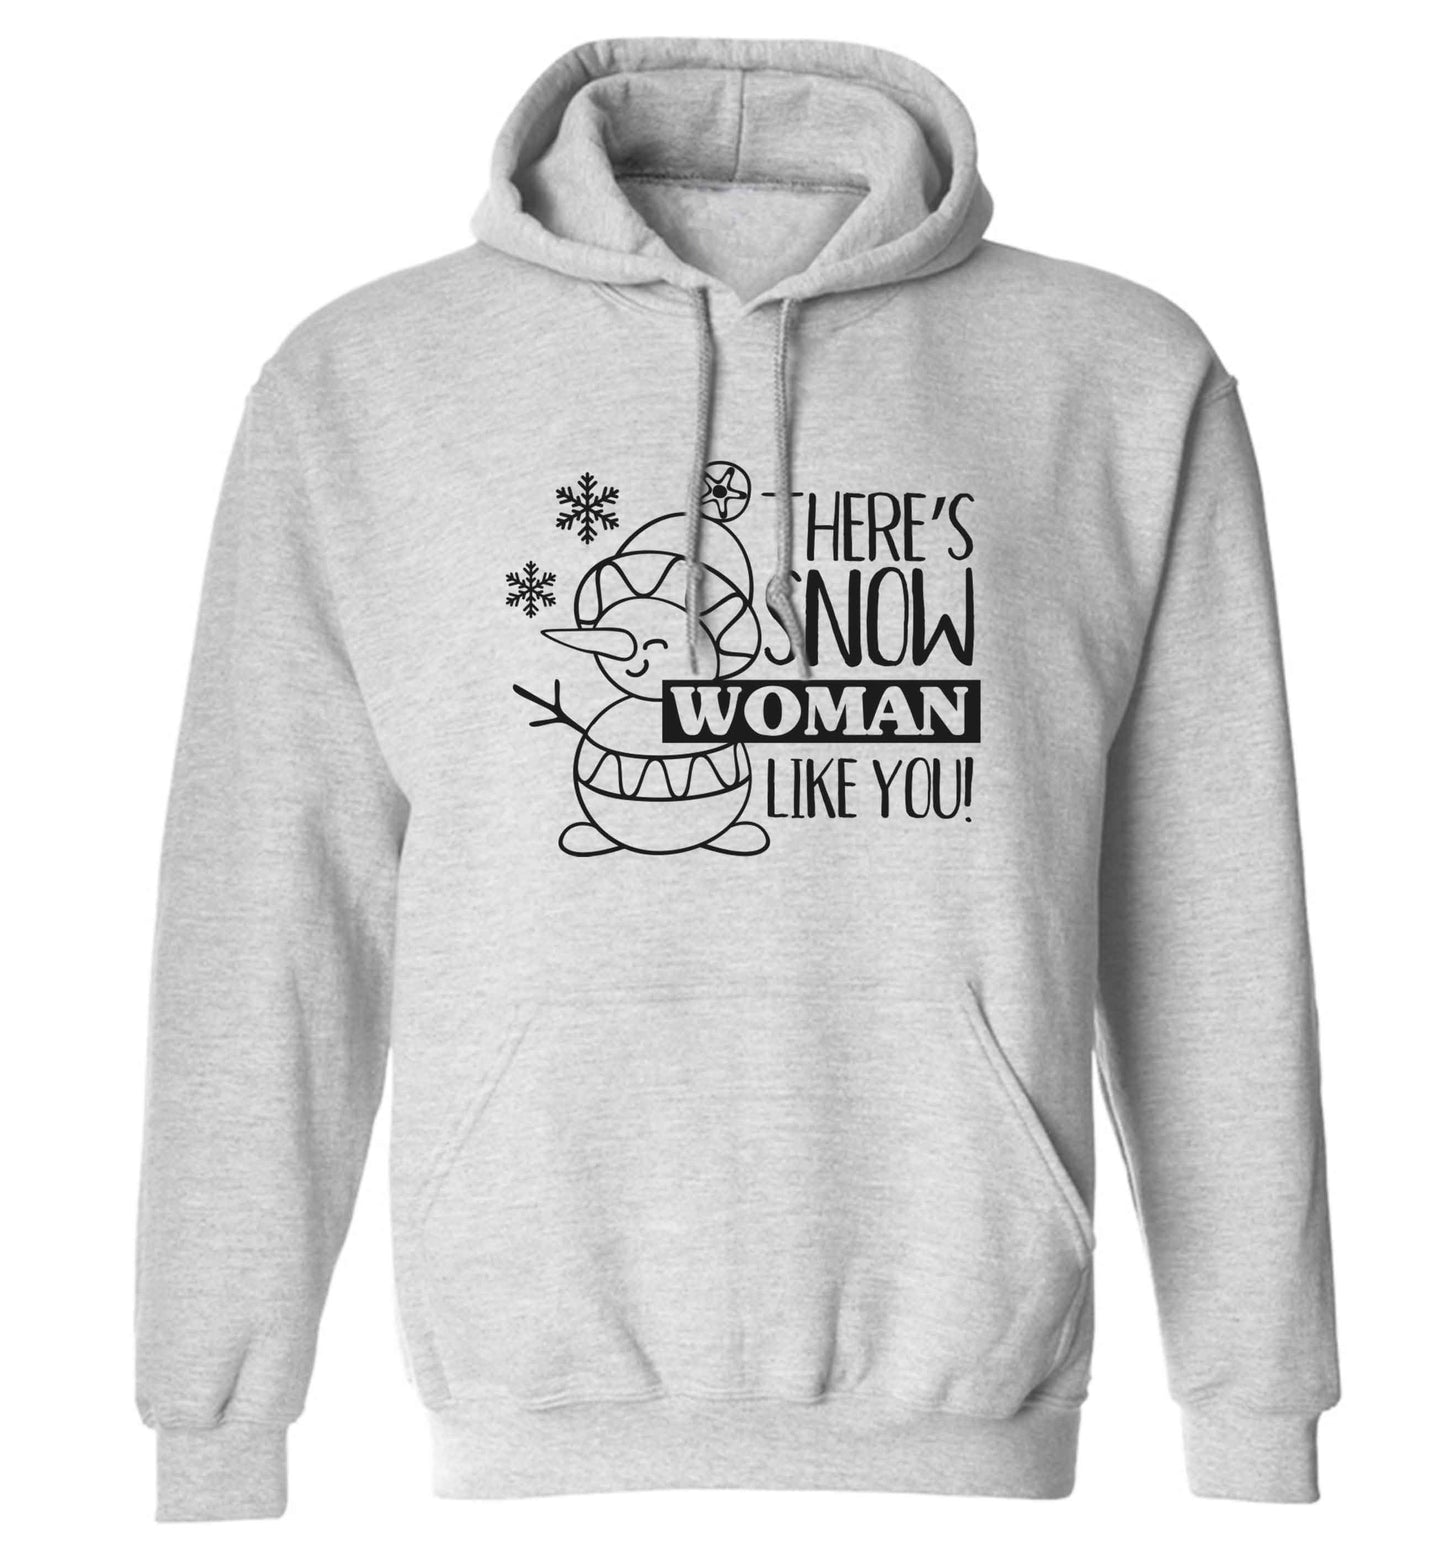 There's snow woman like you adults unisex grey hoodie 2XL